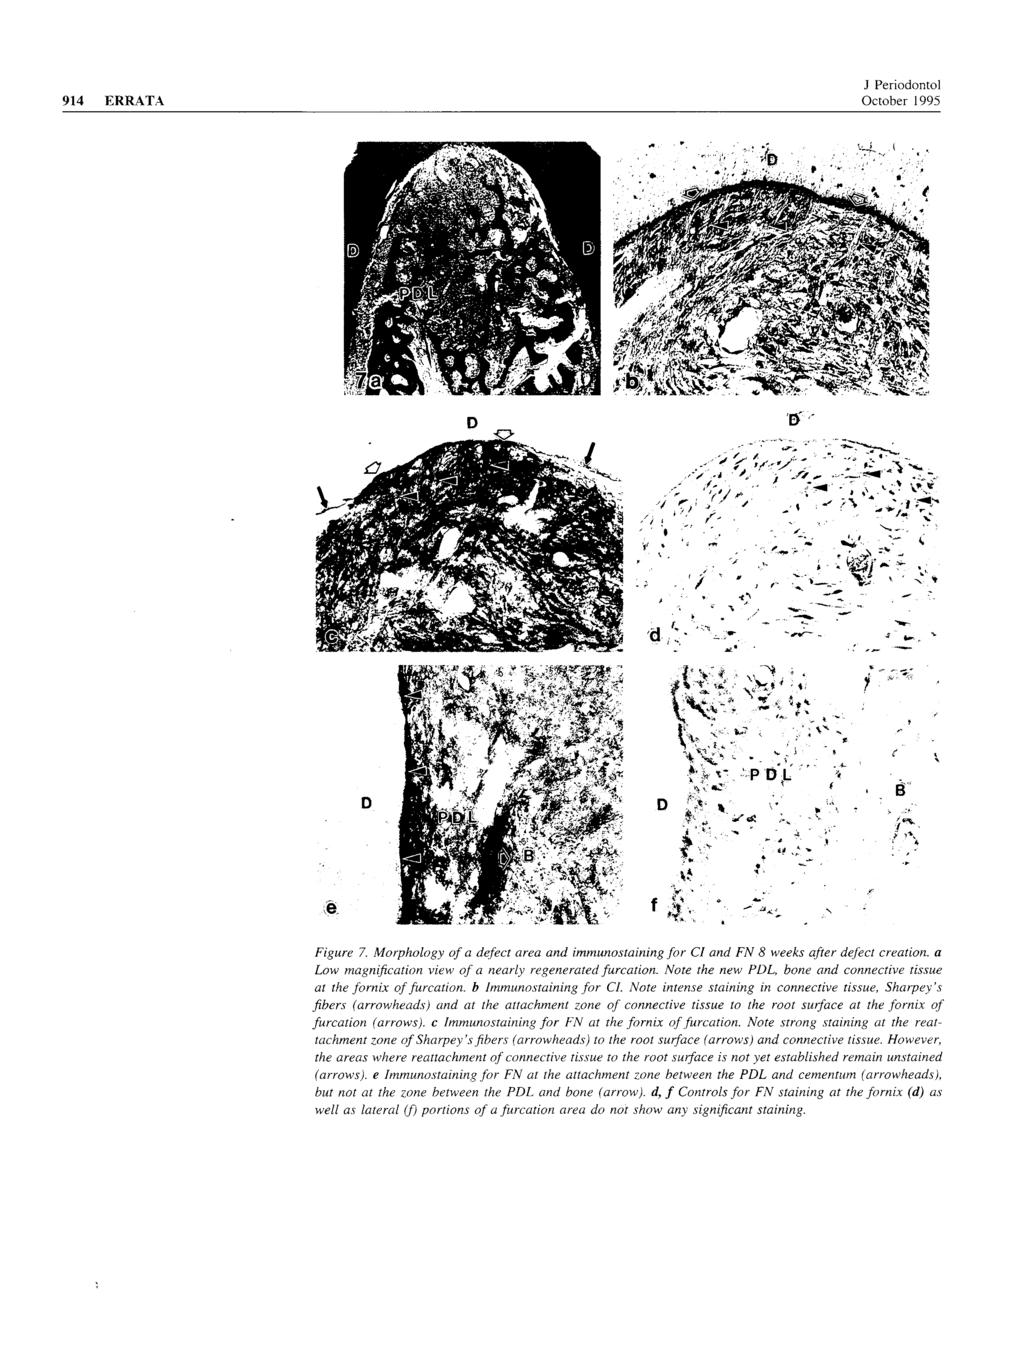 914 ERRATA J Periodontol October 1995 Figure 7. Morphology of a defect area and immunostaining for CI and FN 8 weeks after defect creation, a Low magnification view of a nearly regenerated furcation.